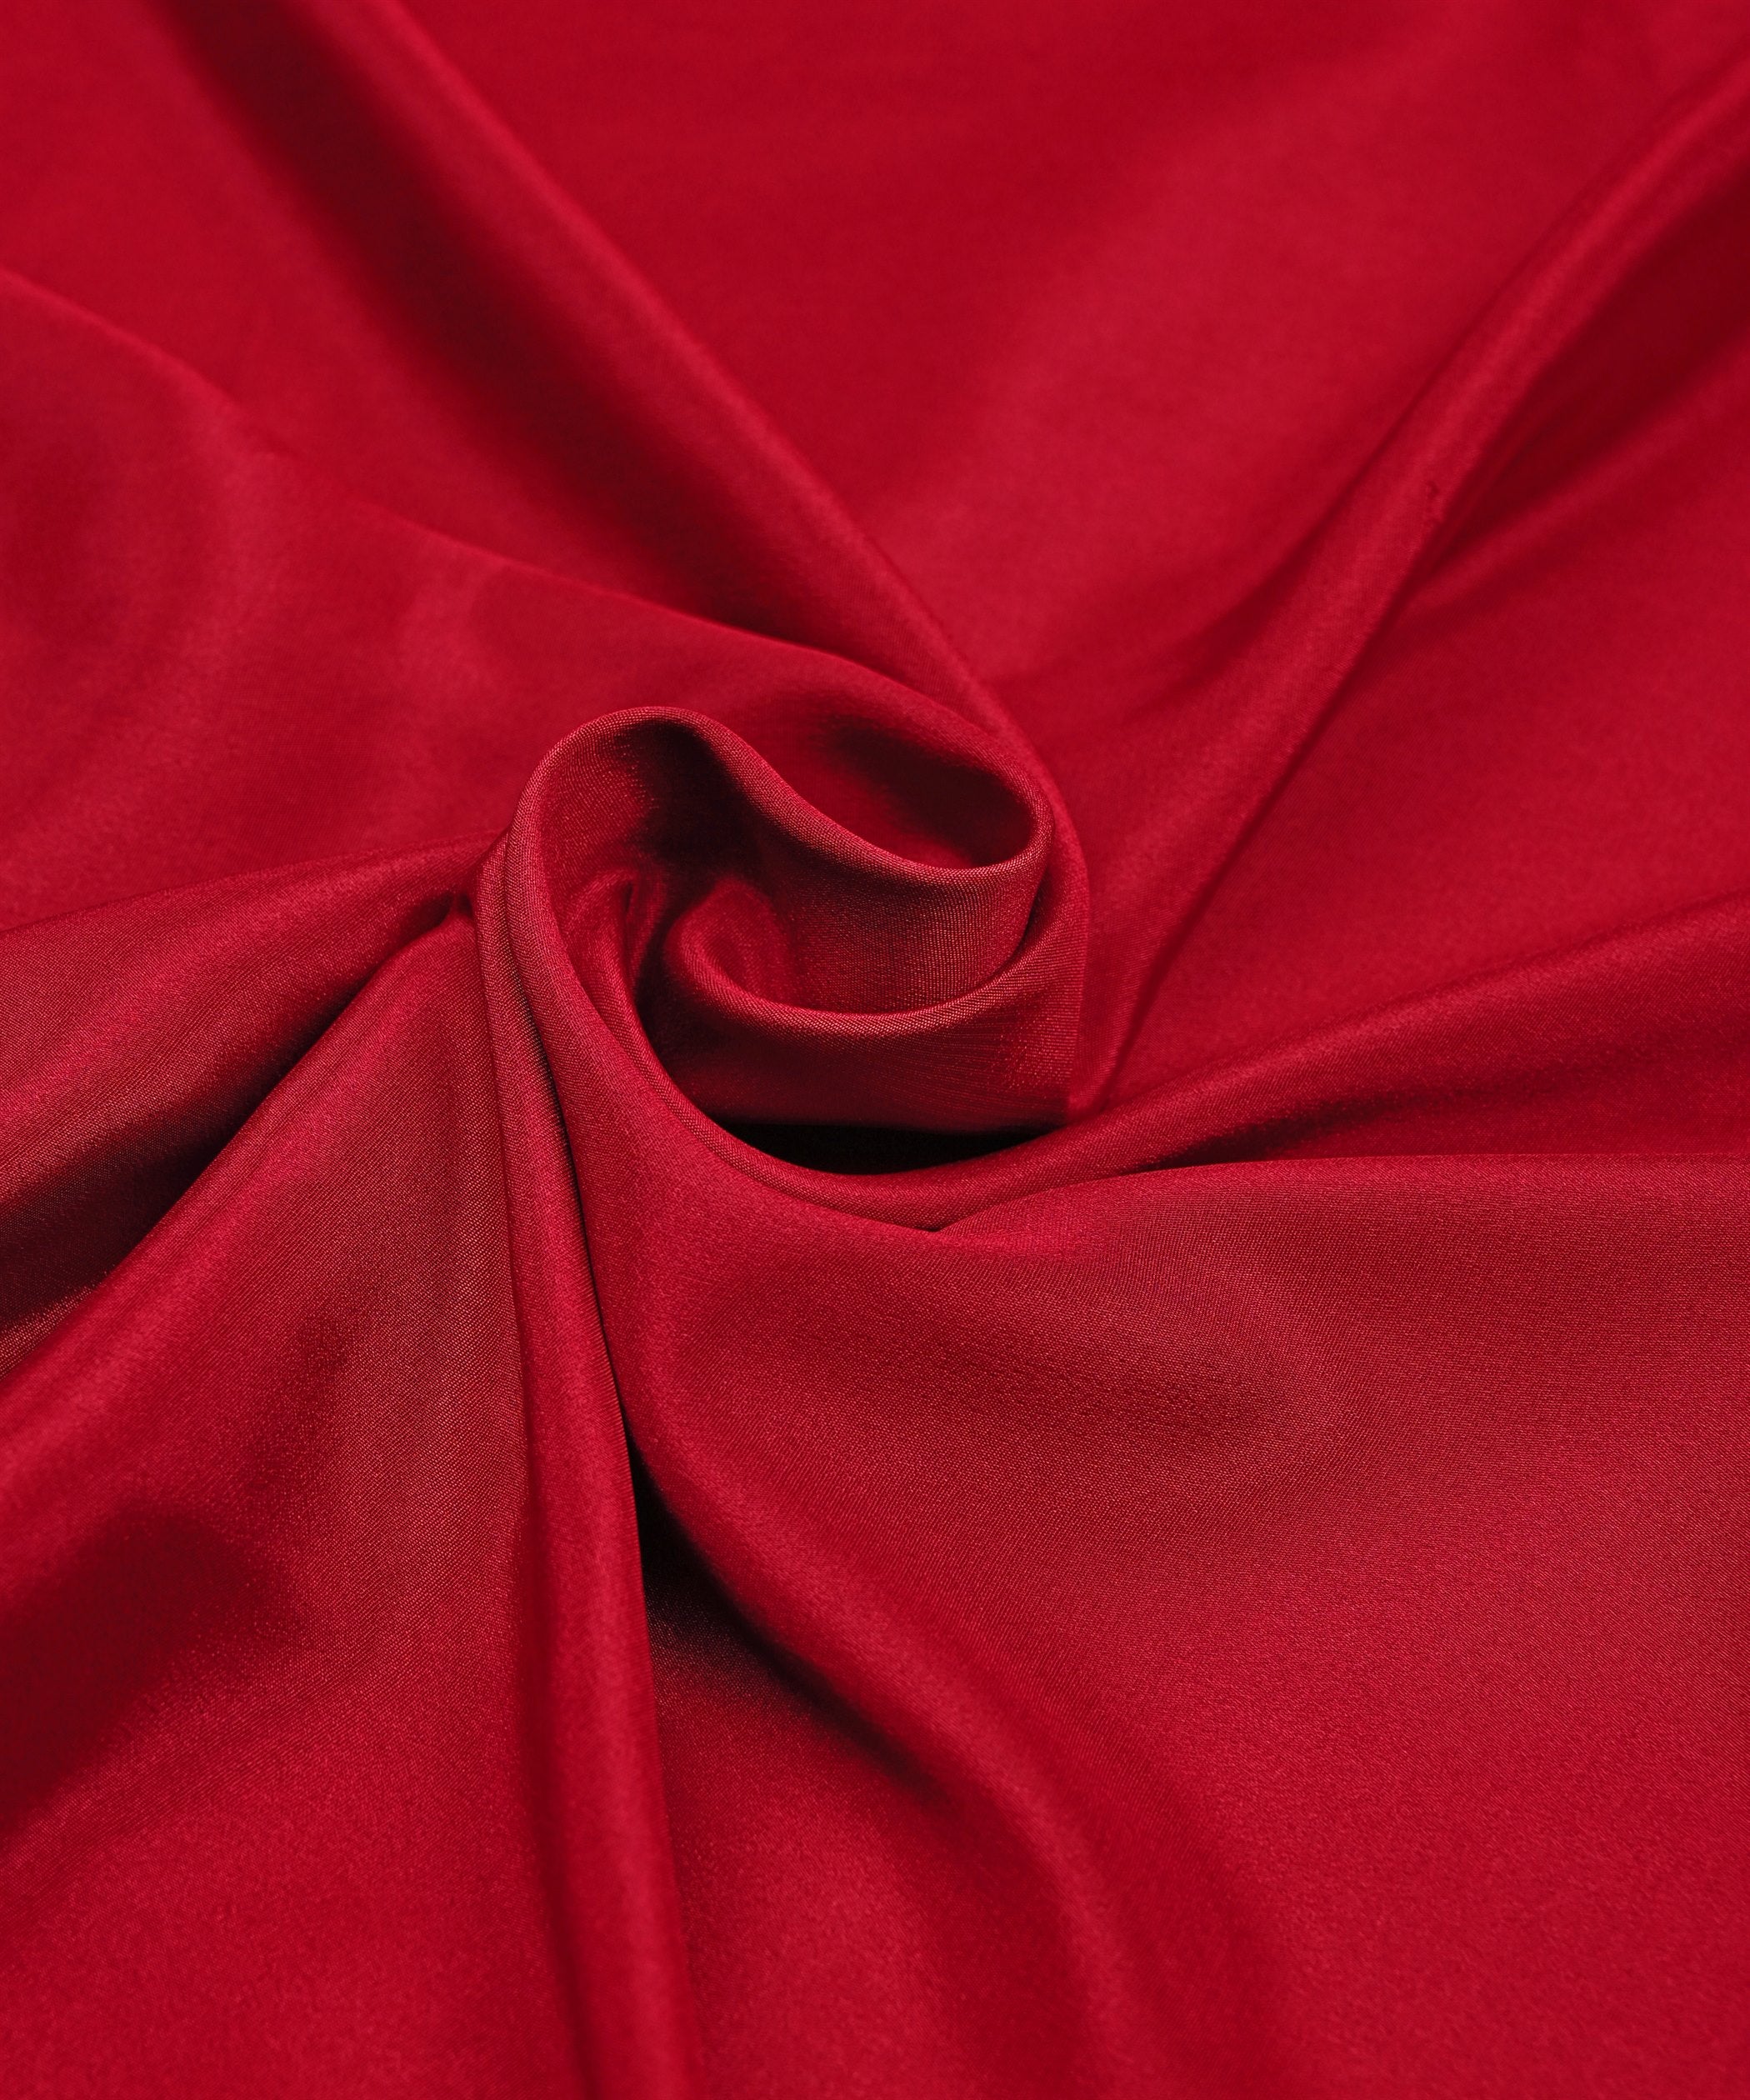 Red Plain Dyed Crepe Fabric